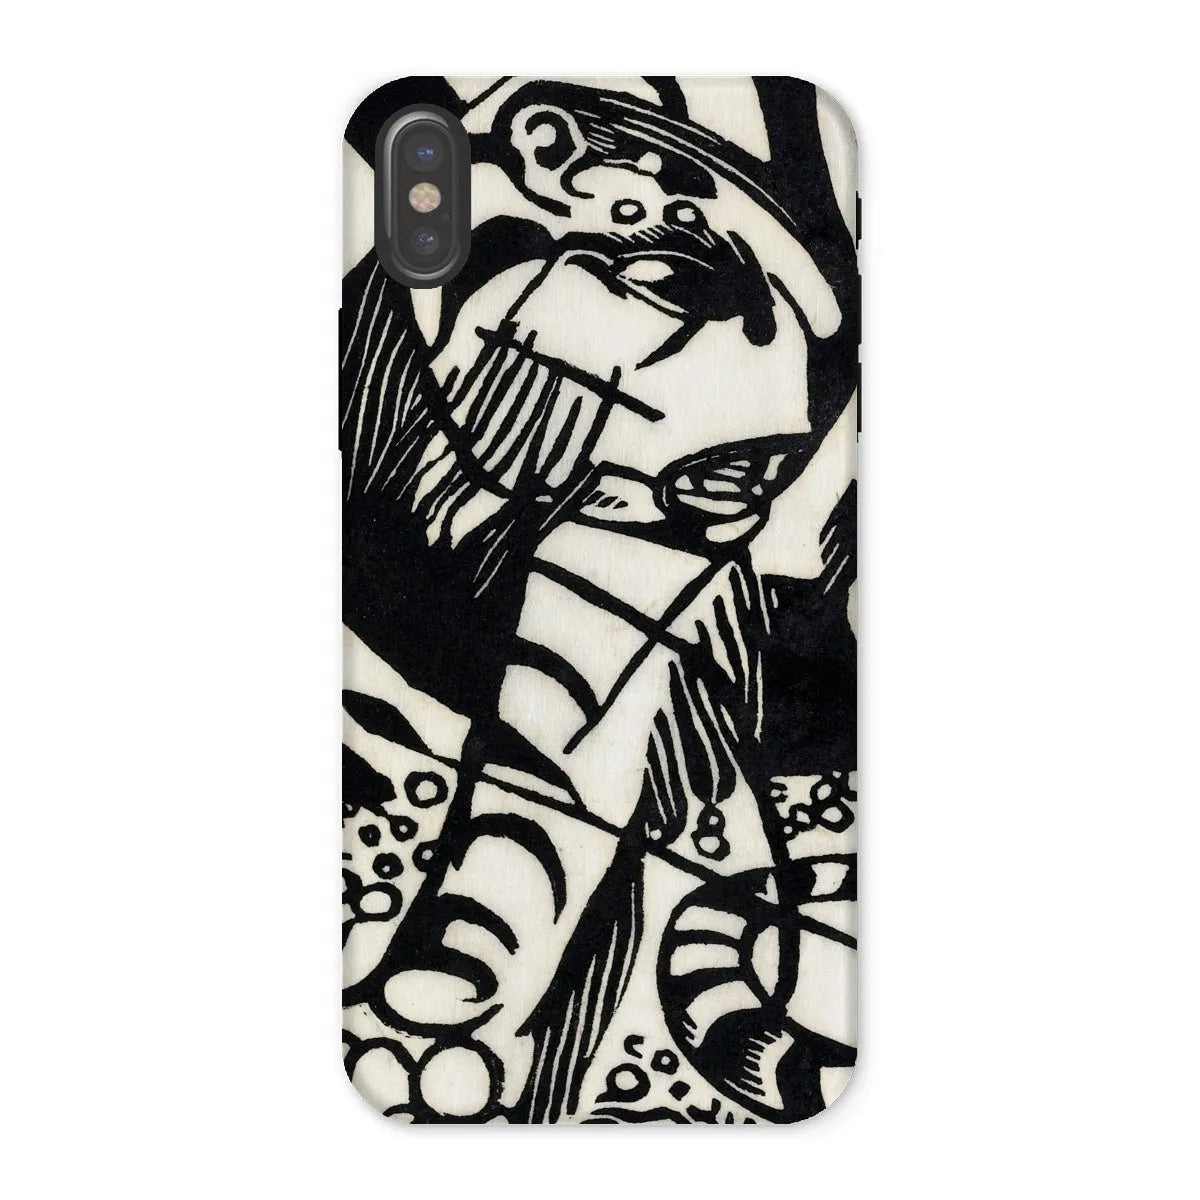 Tiger - Animal Aesthetic Phone Case - Franz Marc - Iphone x / Matte - Mobile Phone Cases - Aesthetic Art